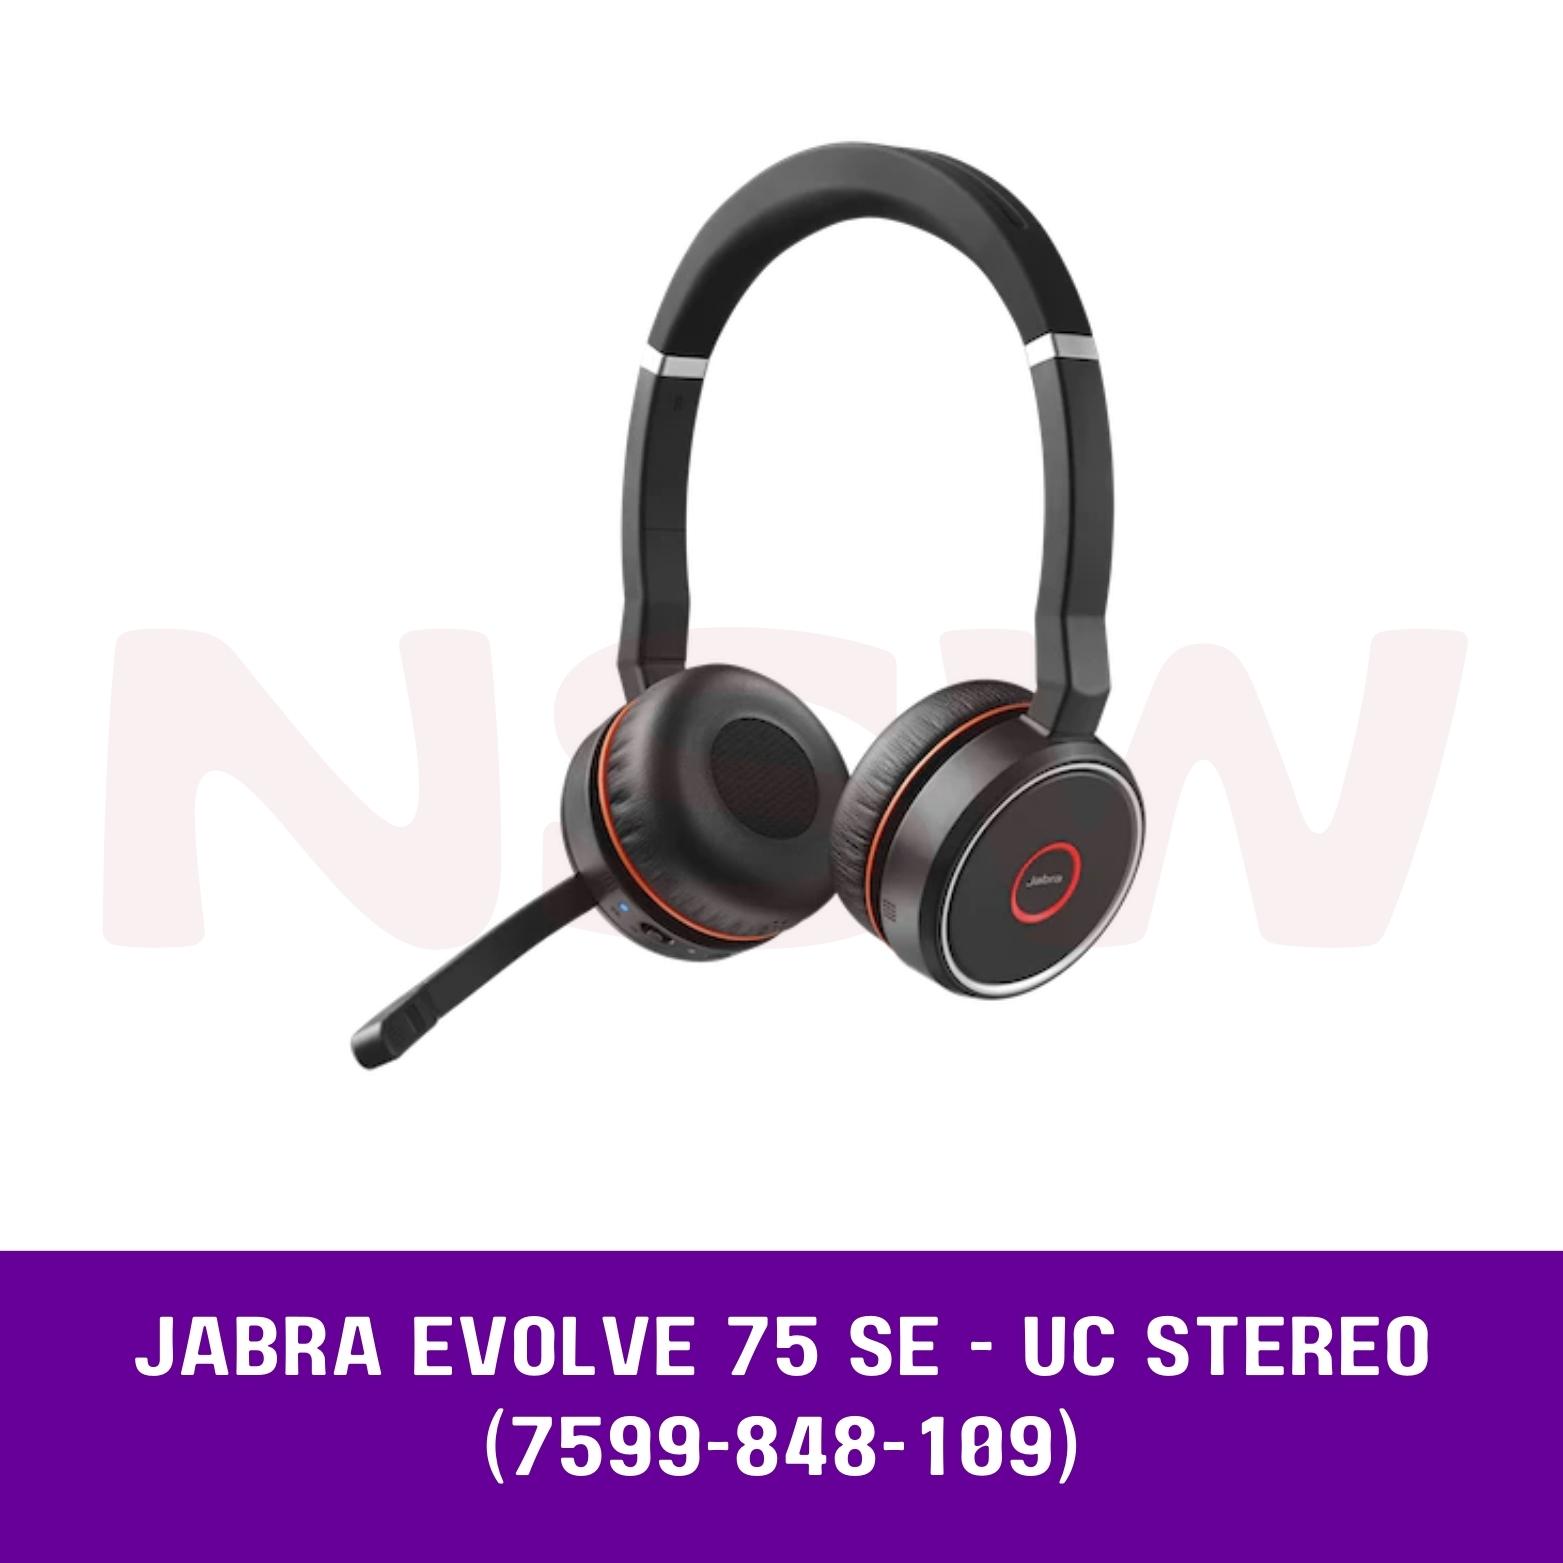 Jabra Evolve 75 SE UC Stereo - headset - with charging stand - 7599-848-199  - Wireless Headsets 